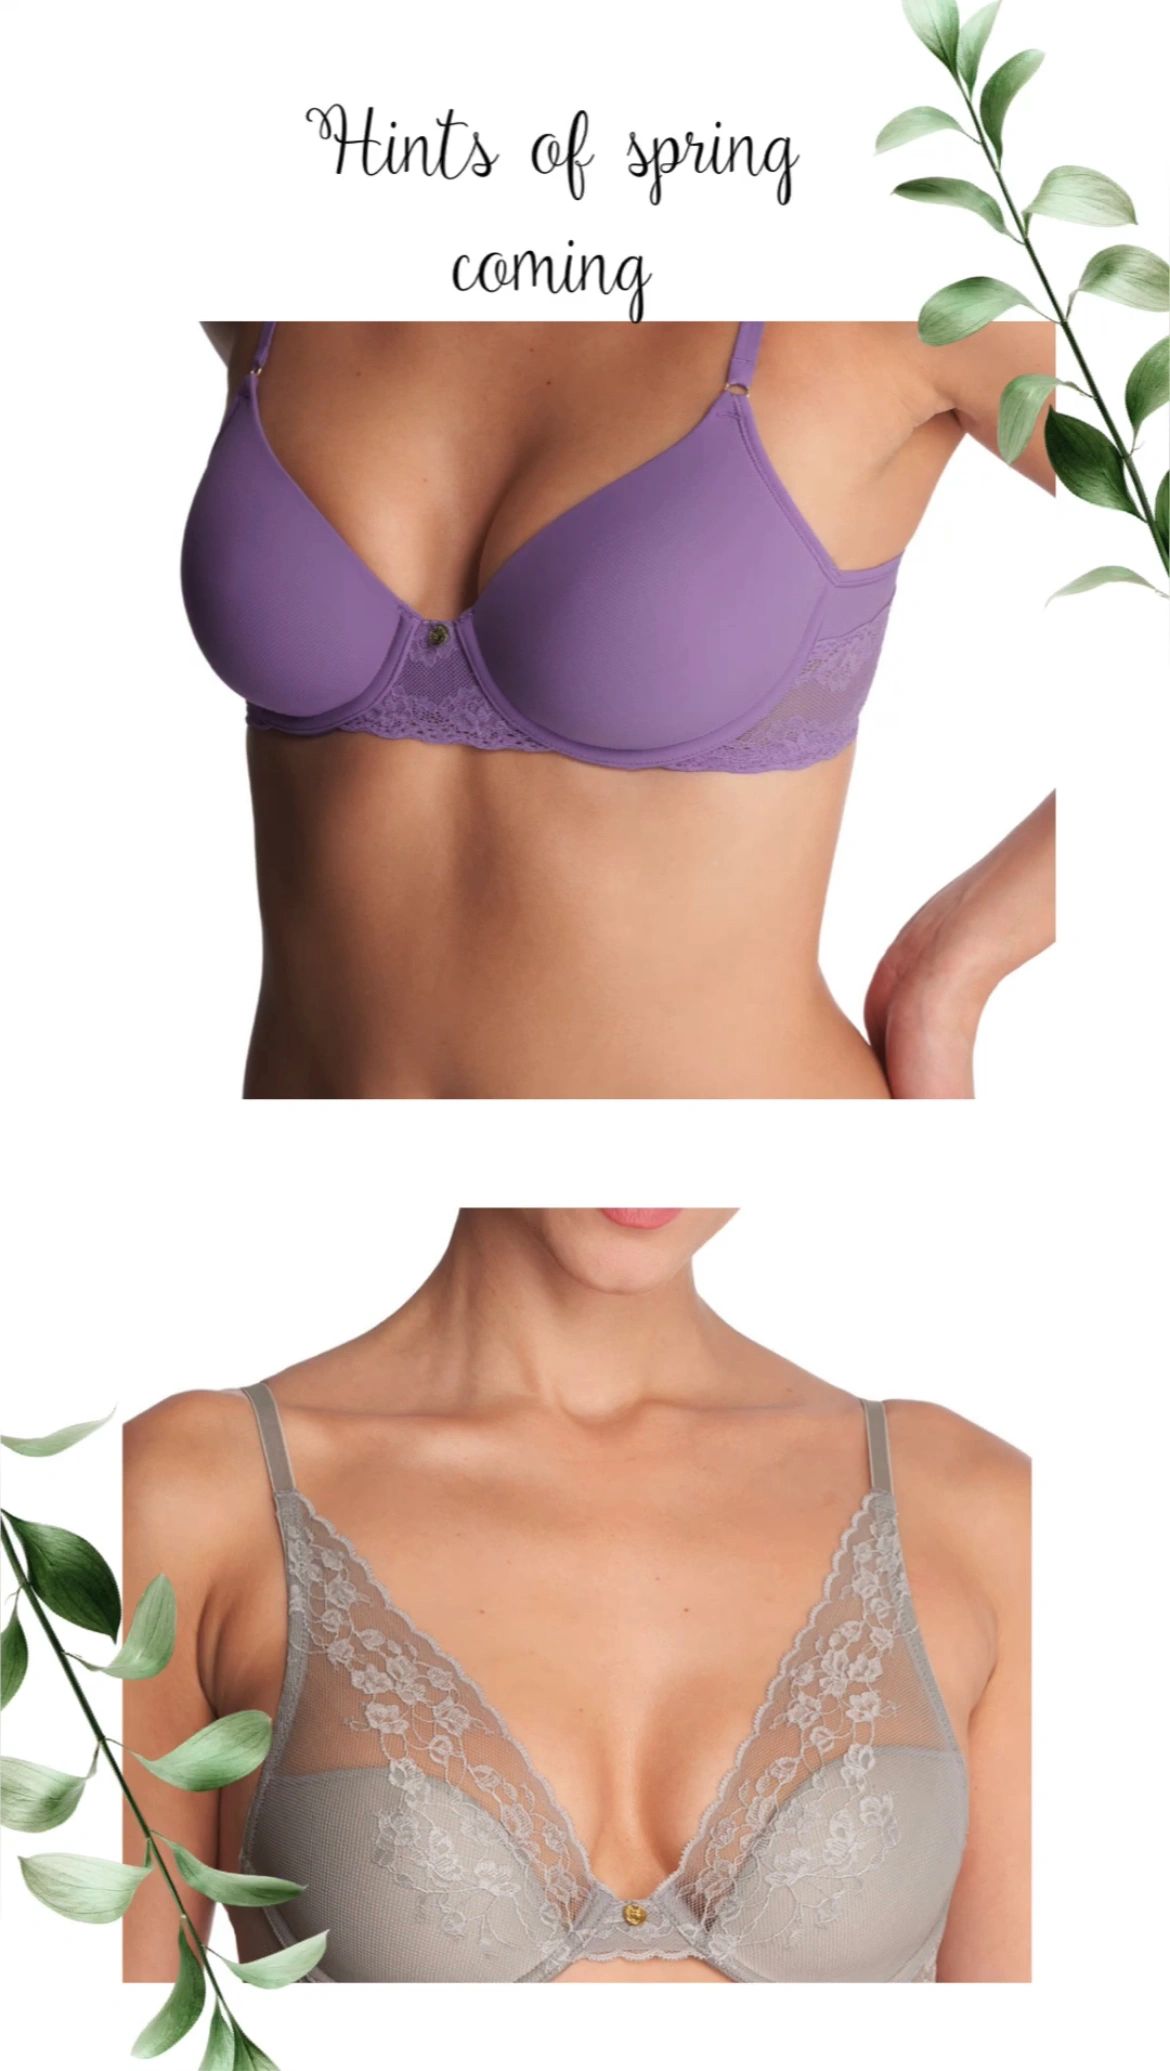 Cornwall NY Bra Fitting Virtual Appointments